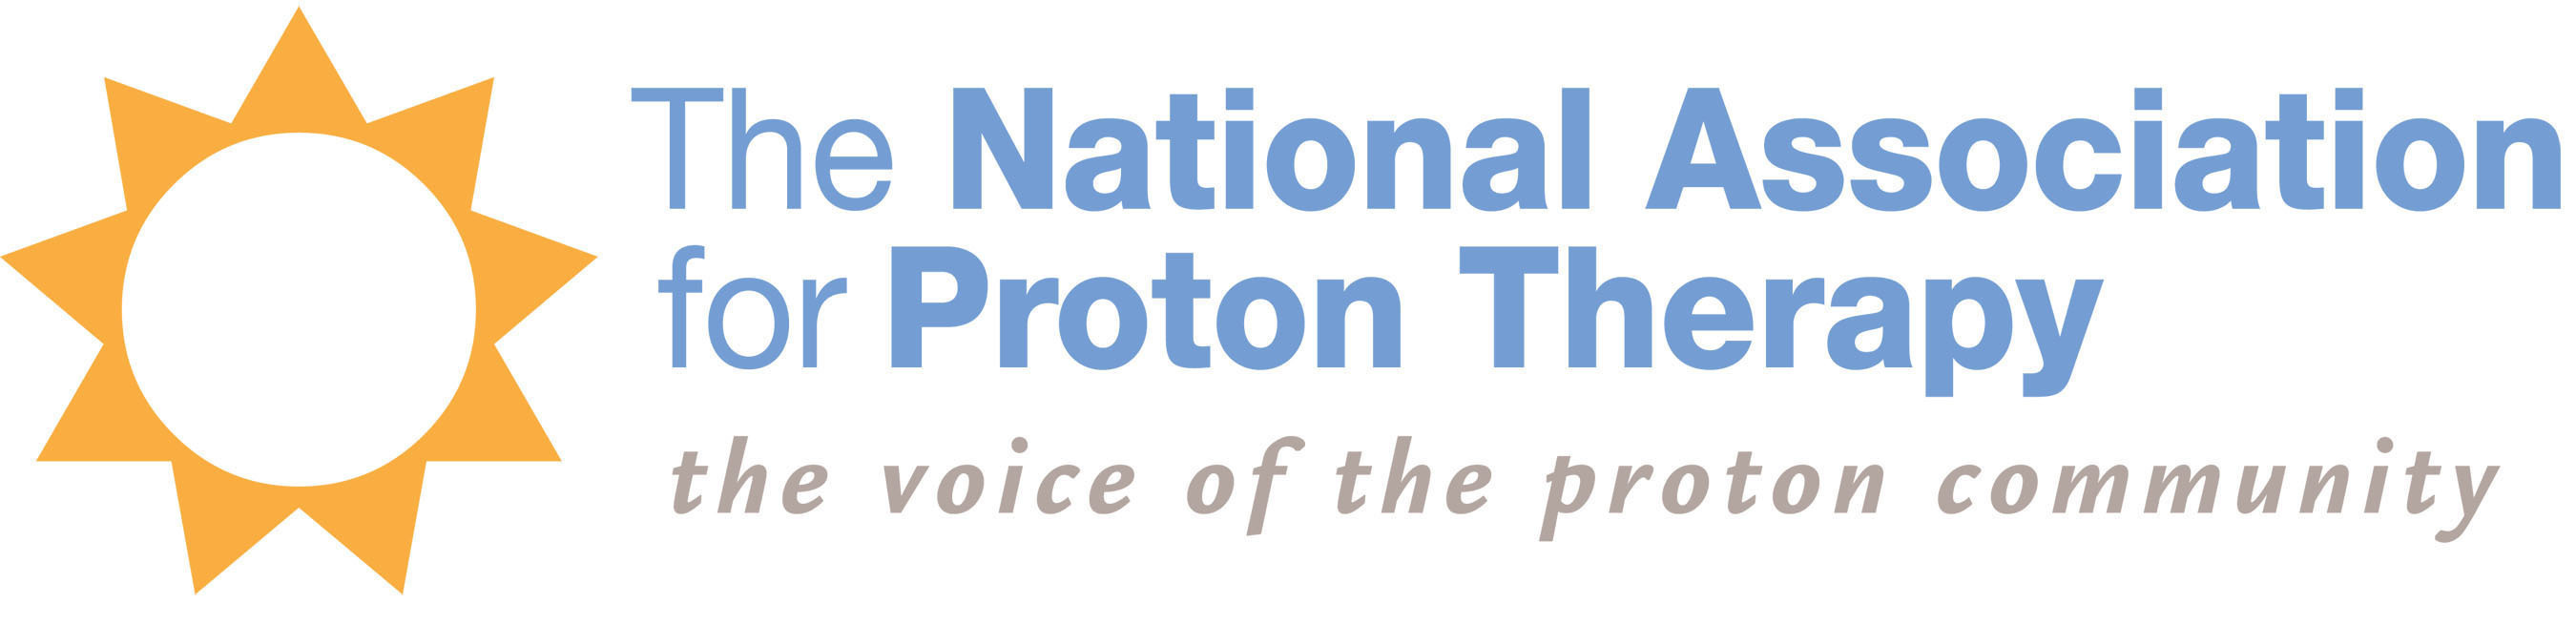 The National Association for Proton Therapy (NAPT) logo.